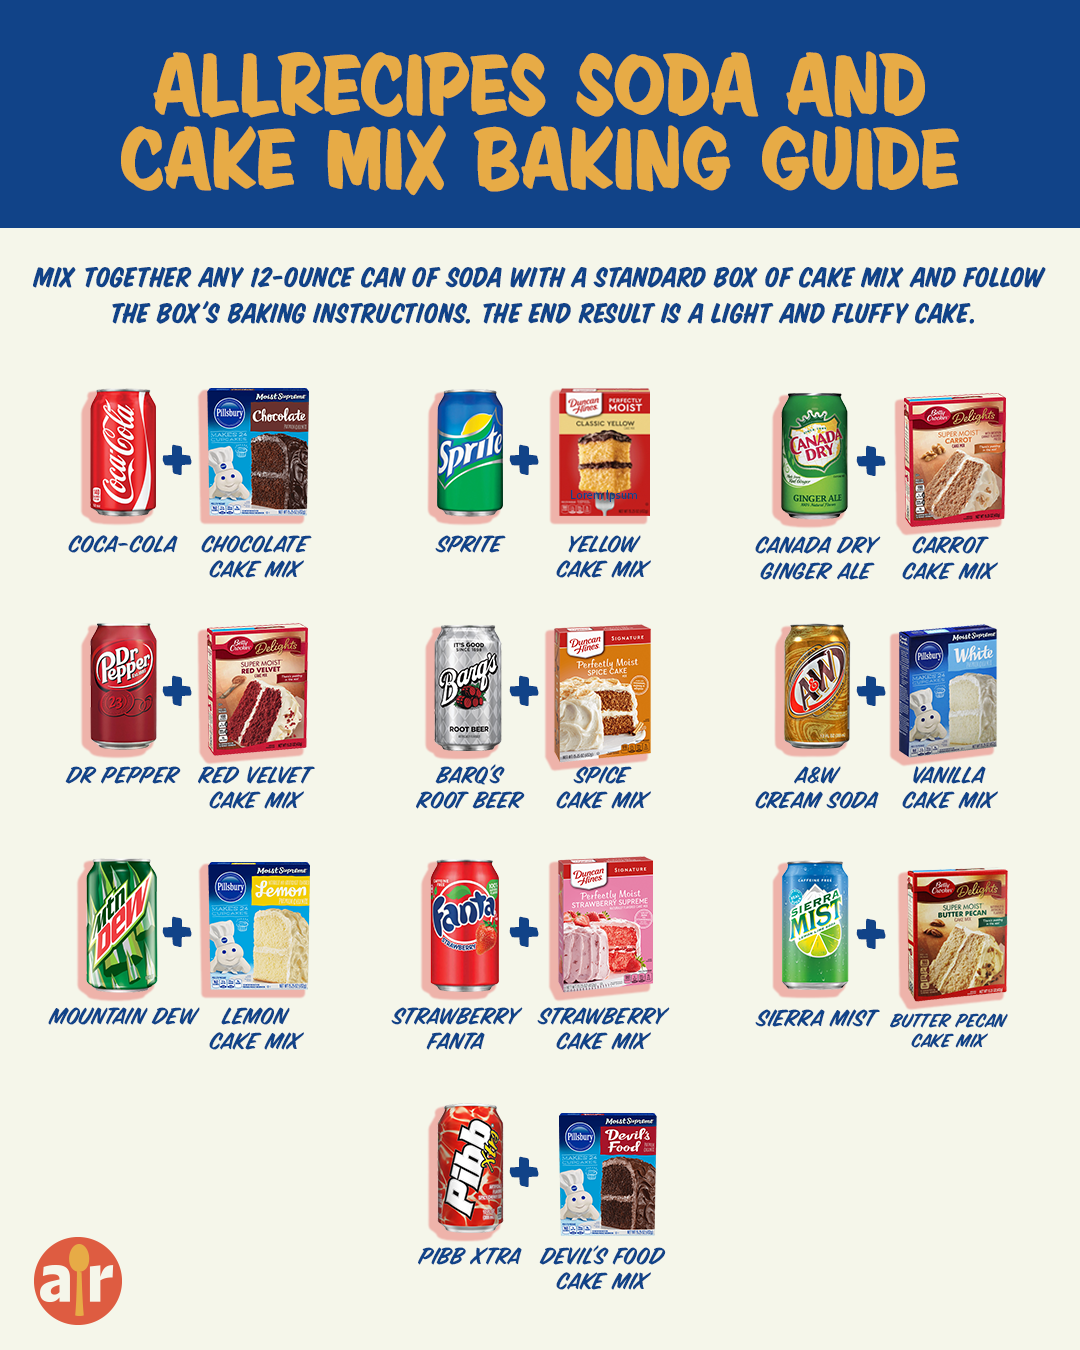 Soda and Cake Mix Baking Guide